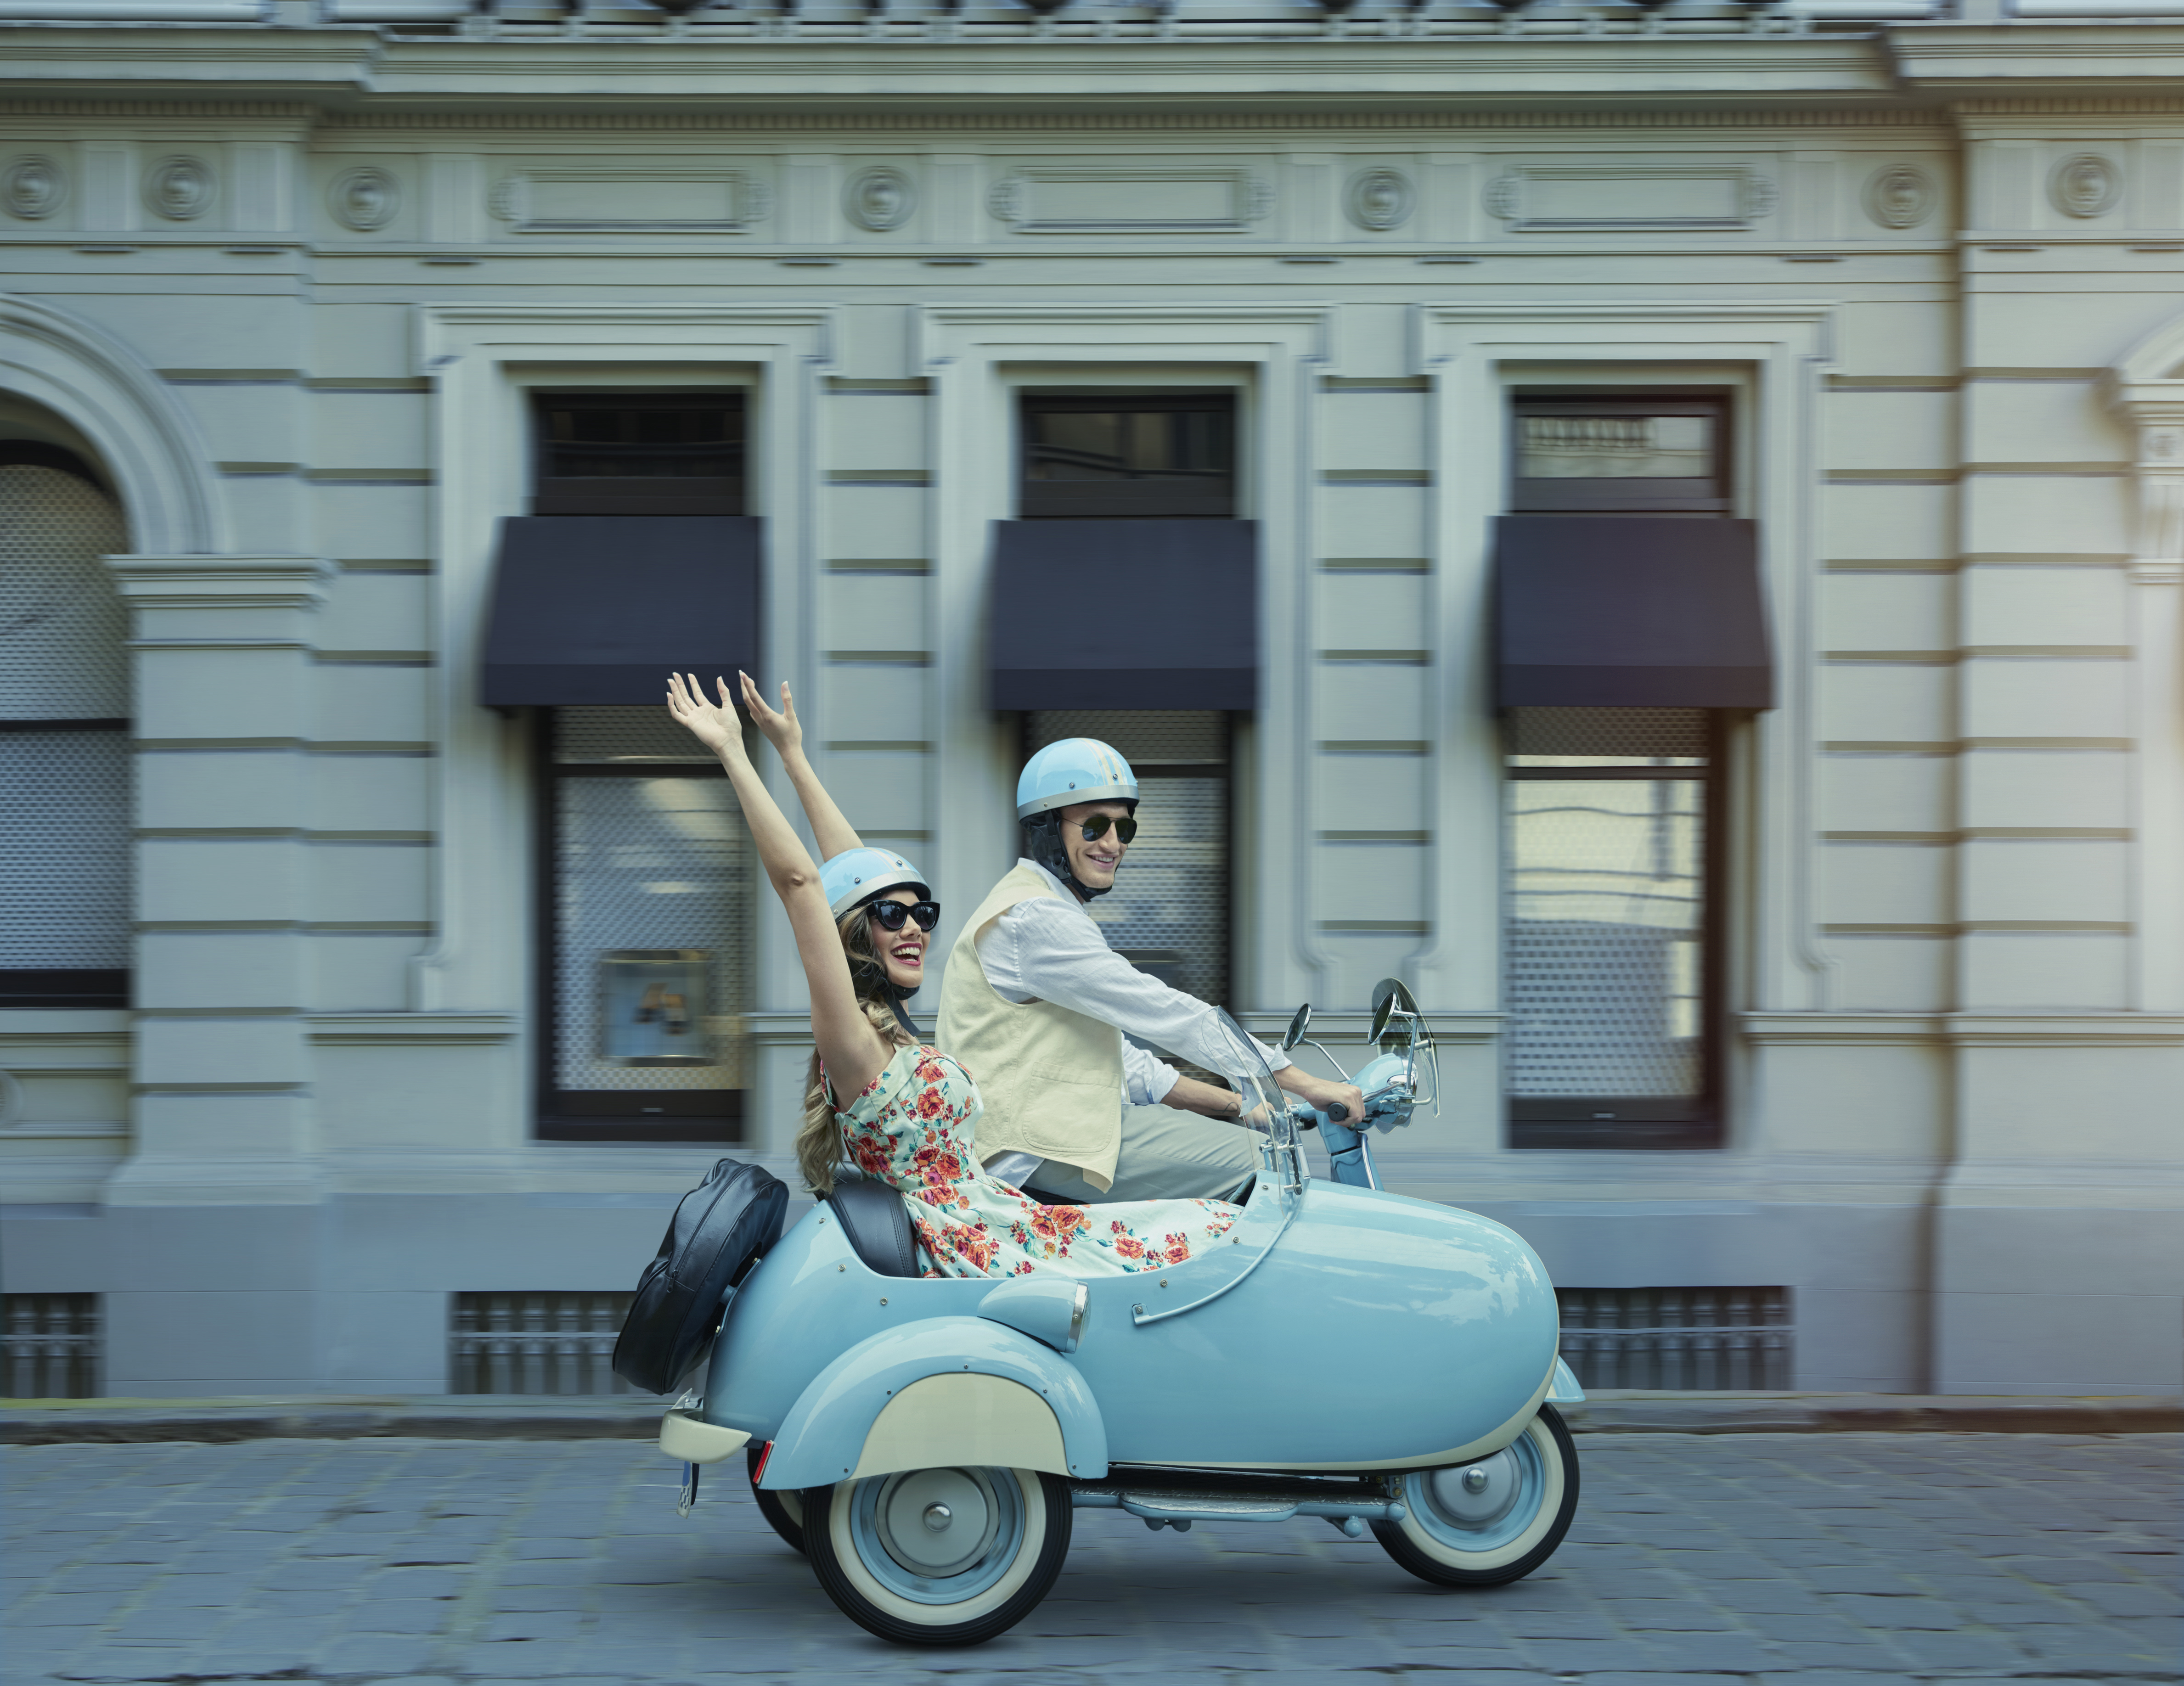 A excited woman sitting in a baby blue sidecar with her partner. | Source Getty Images